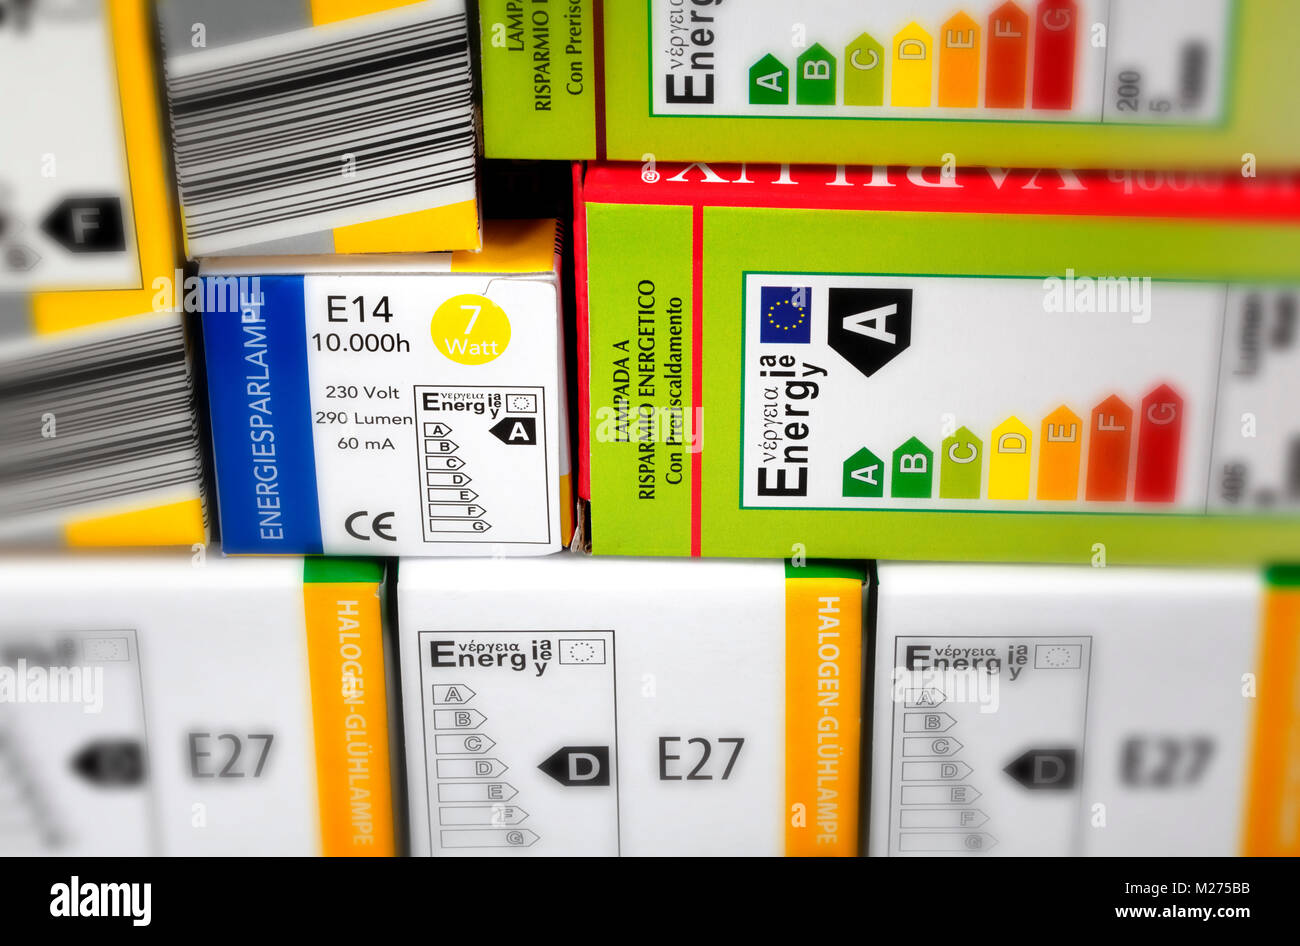 Energy efficient products labels Stock Photo